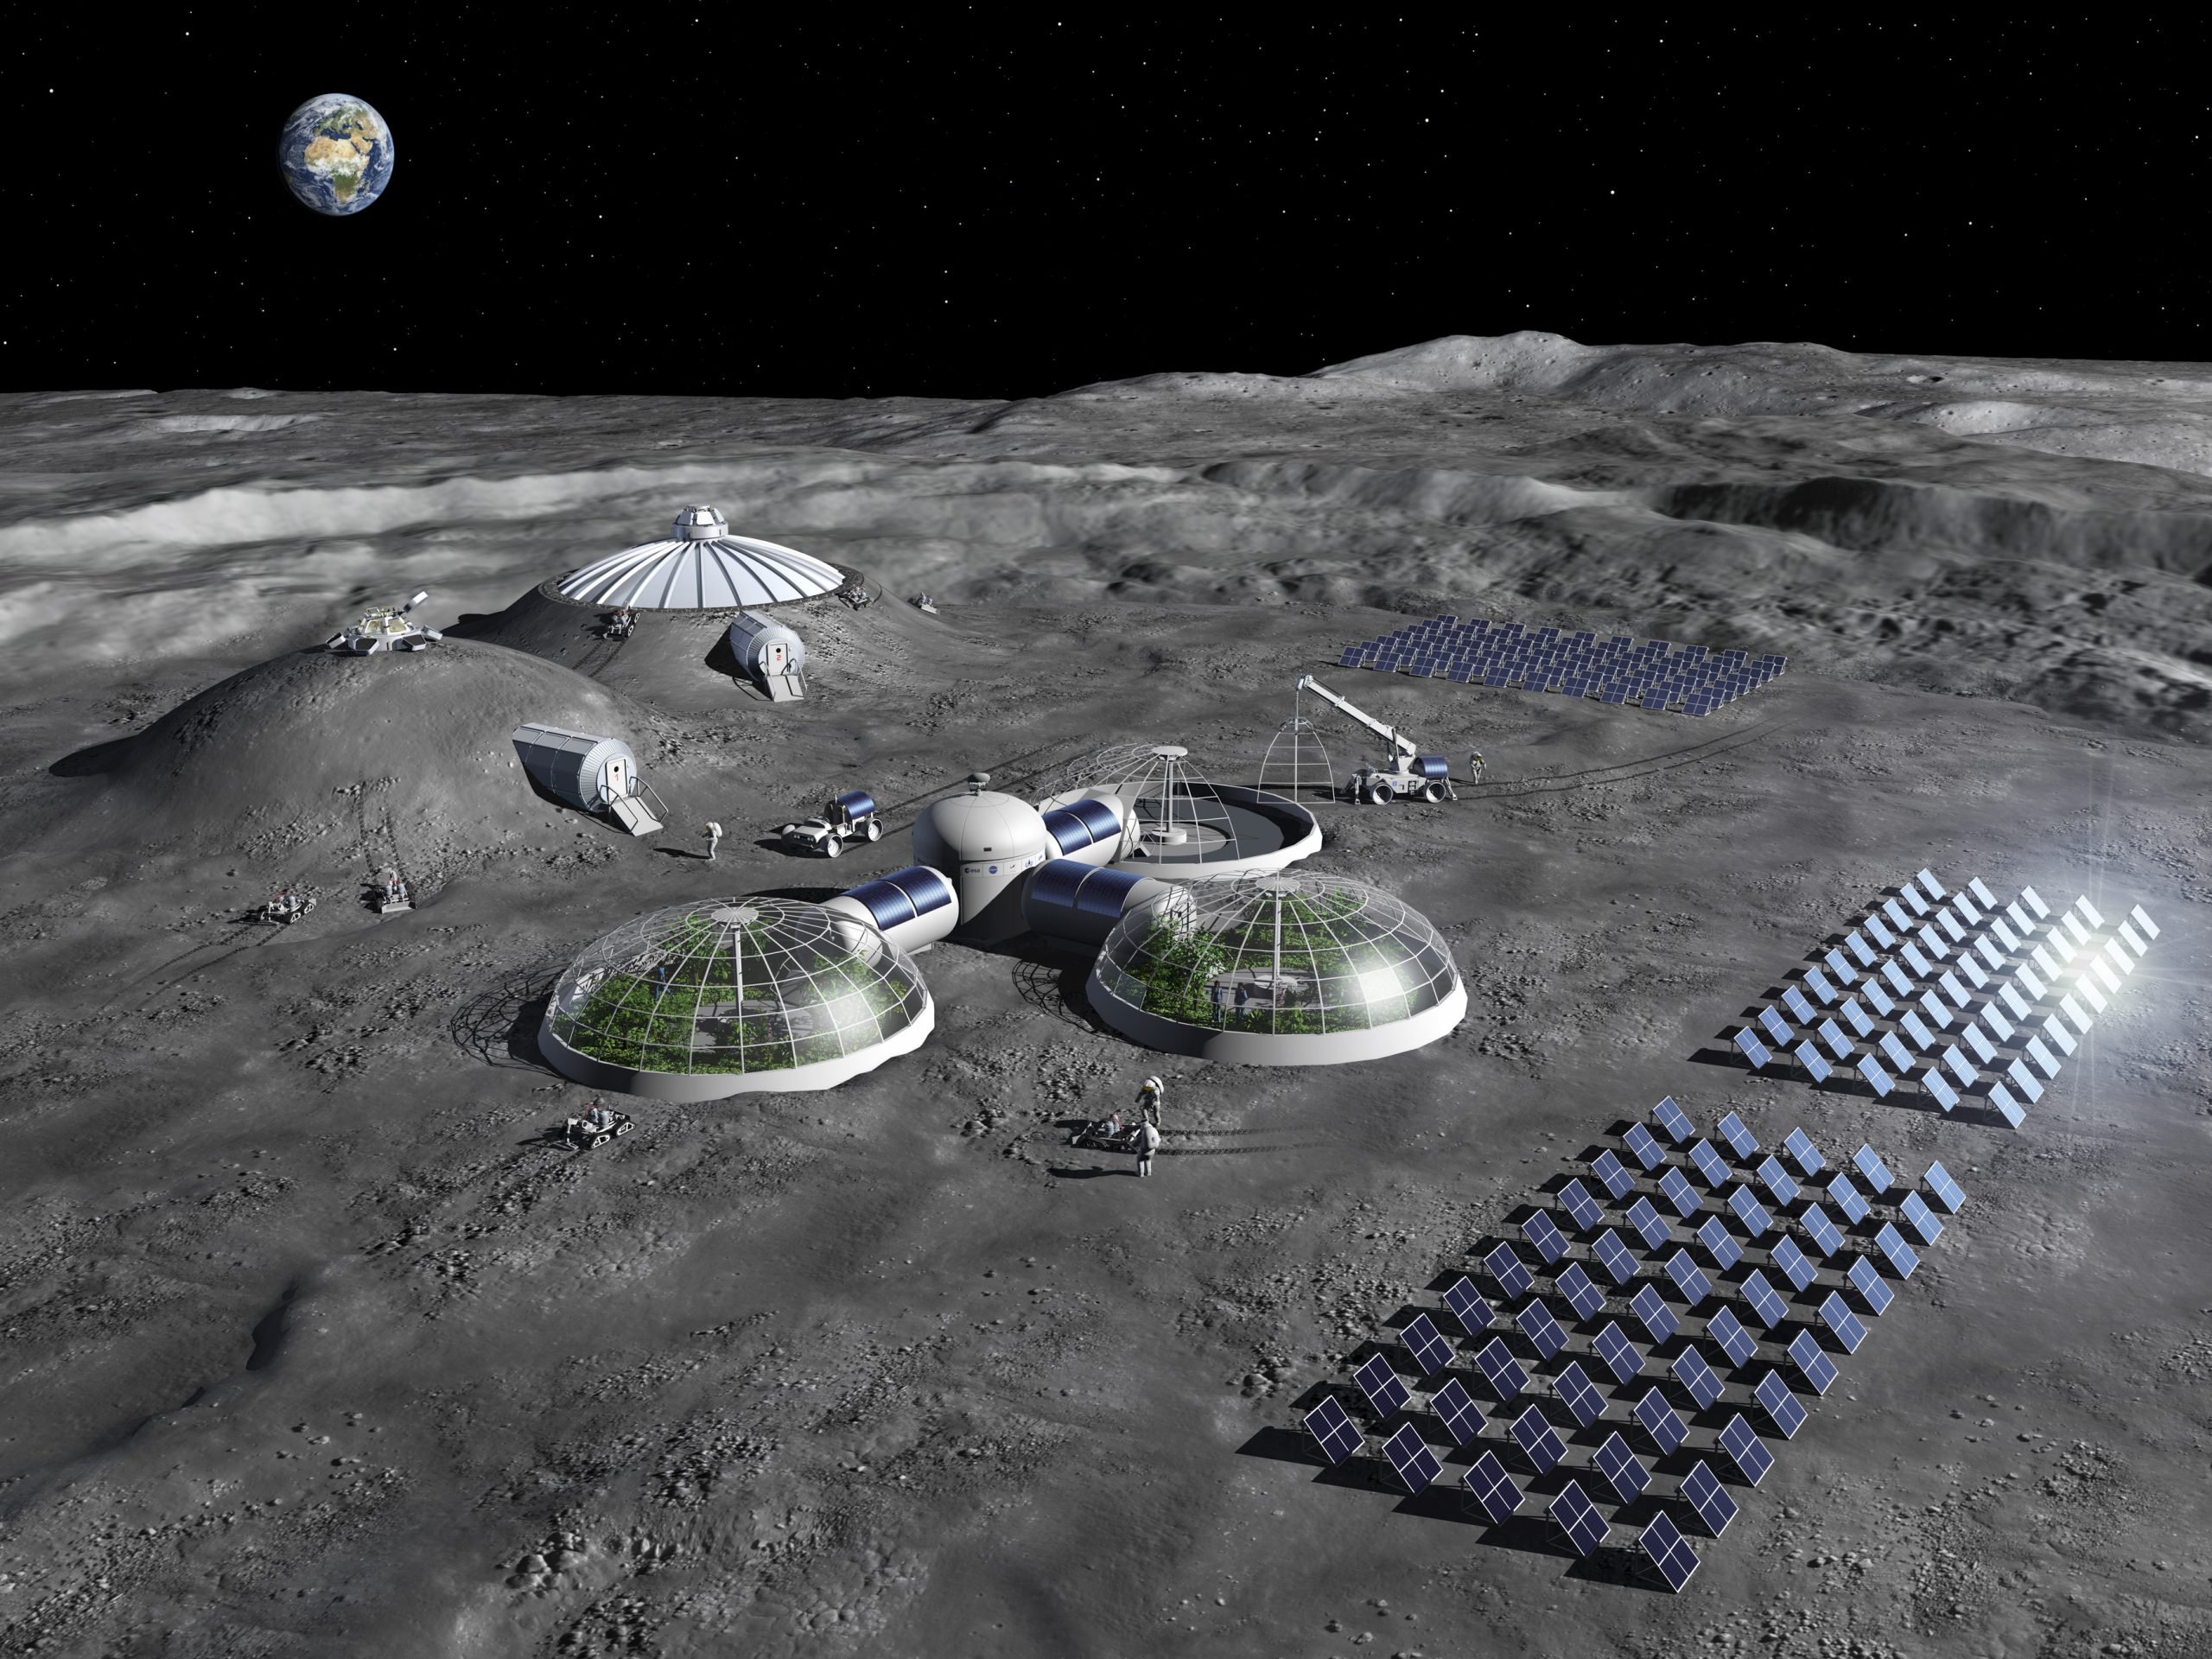 China Wants to Build 3D-Printed Moon Bases Out of Lunar Soil